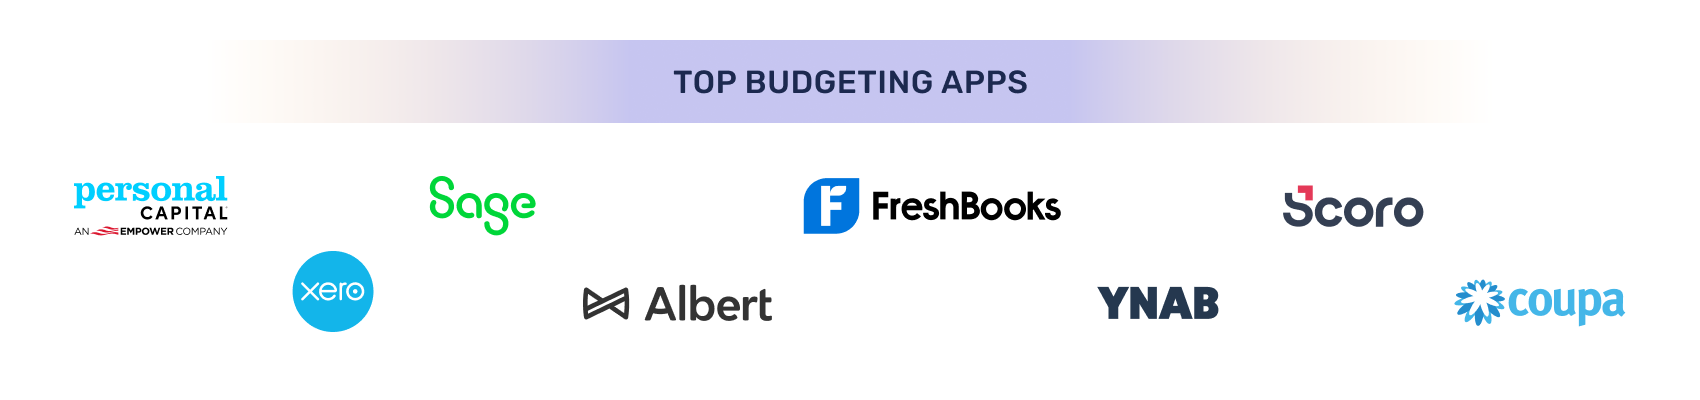 Top budgeting apps